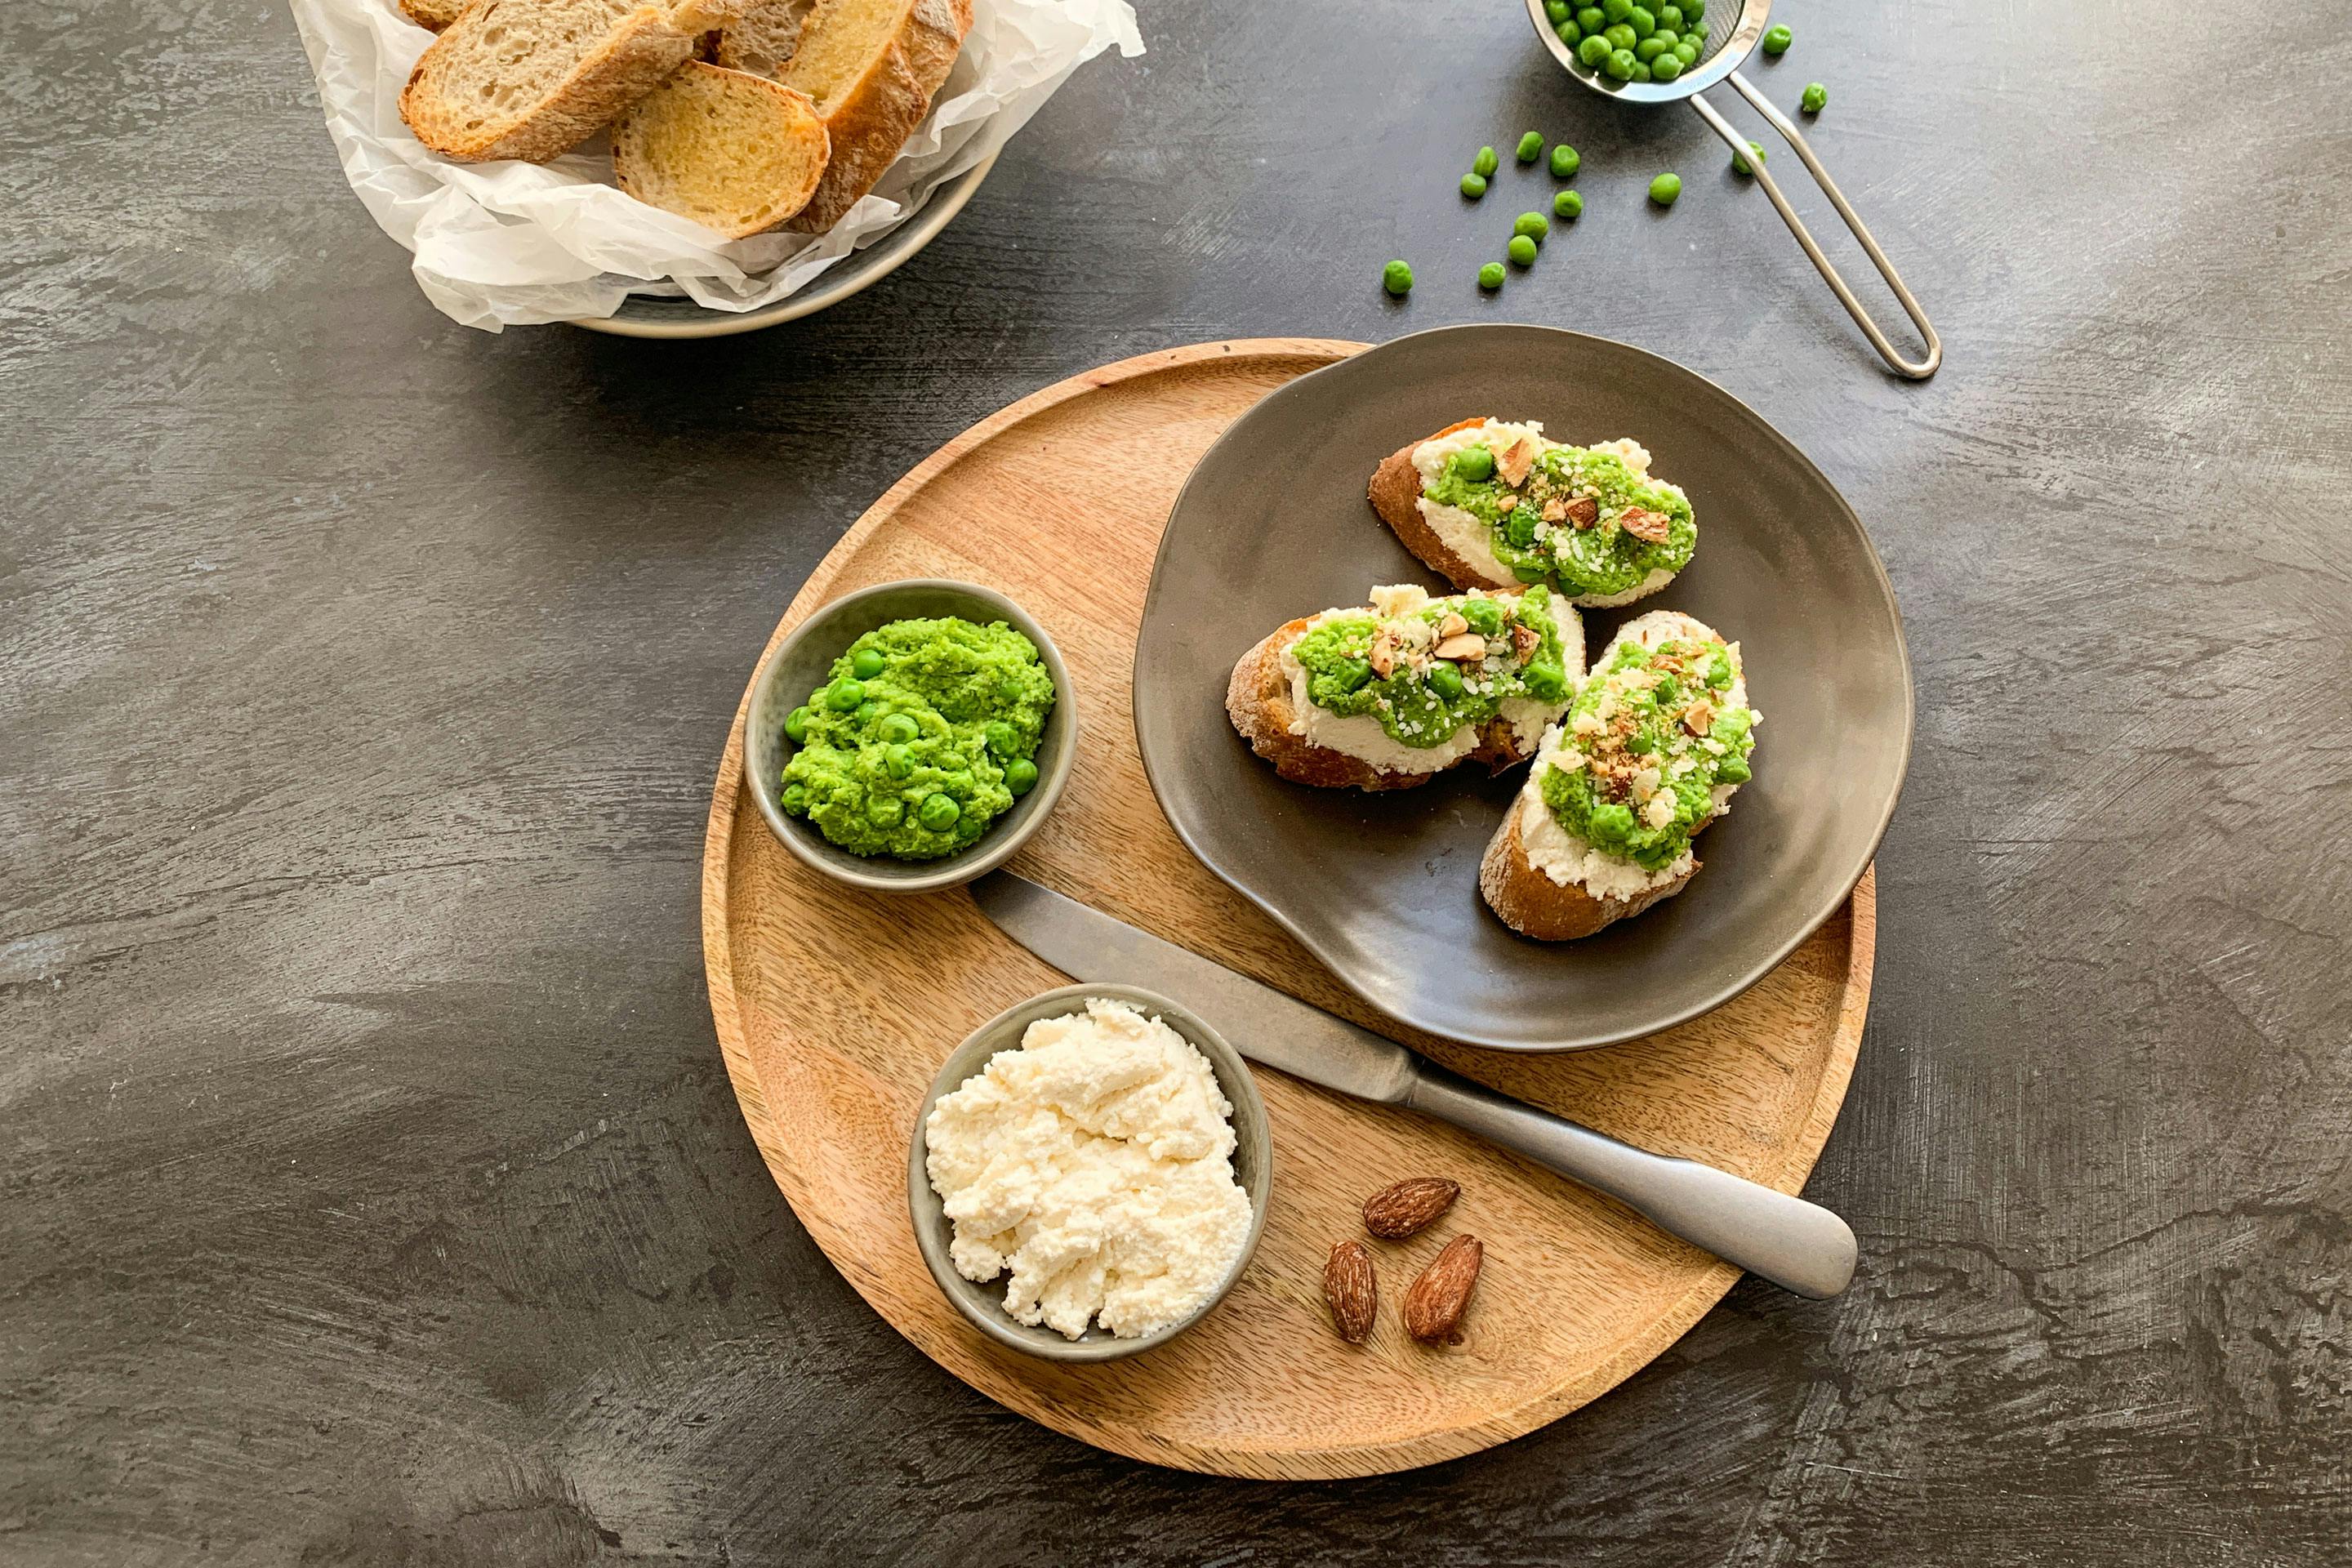 Pea and ricotta crostini served on a wooden plate